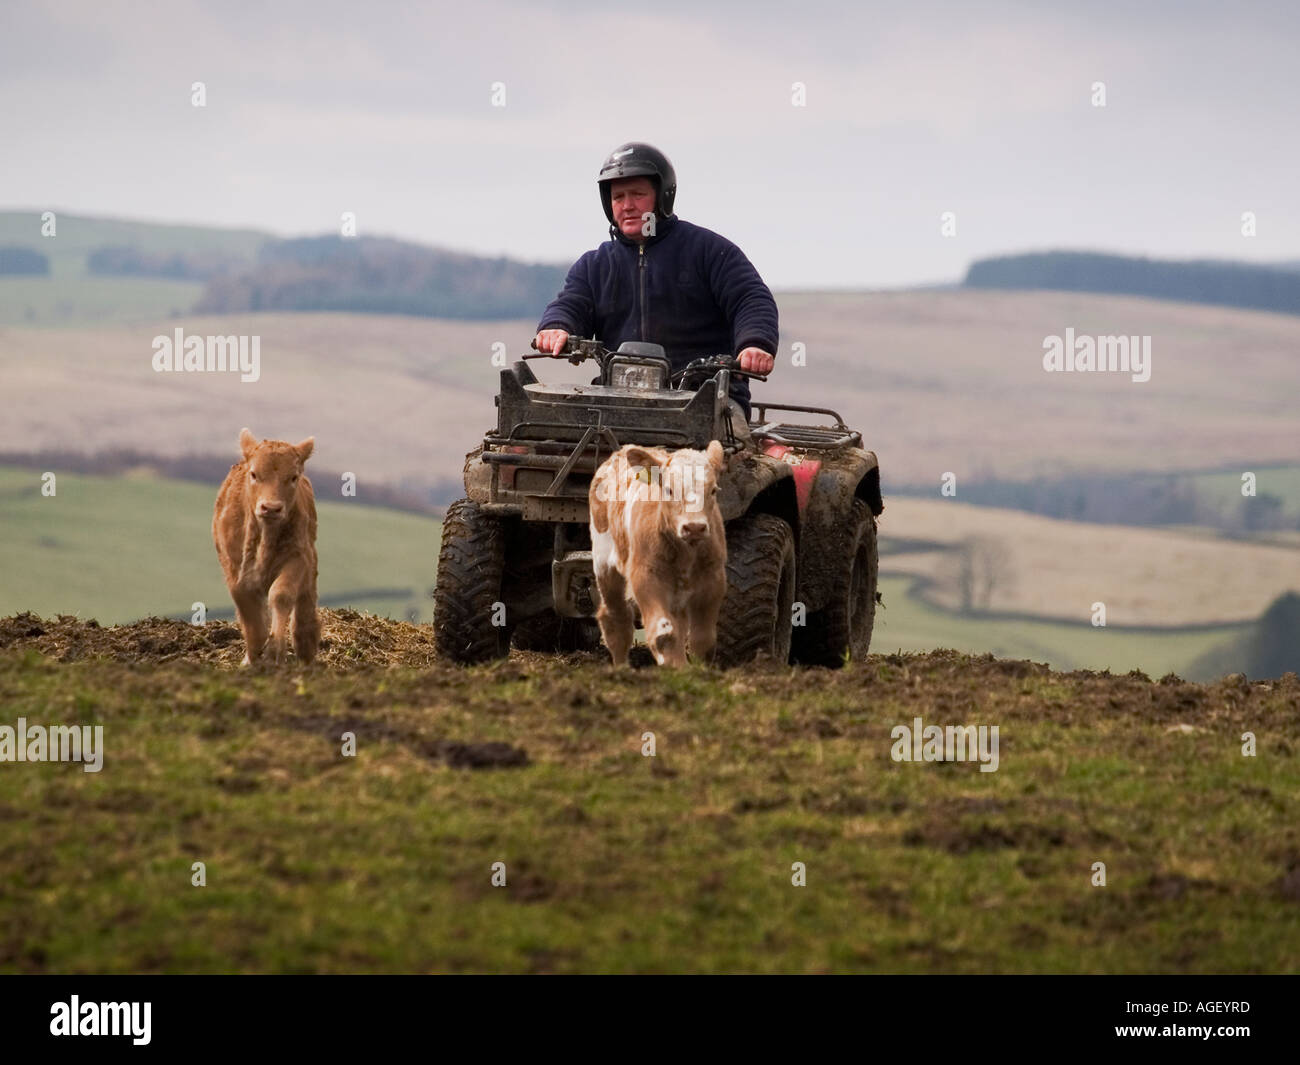 Farmer uses a quadbike to round up his herd of cattle. Stock Photo